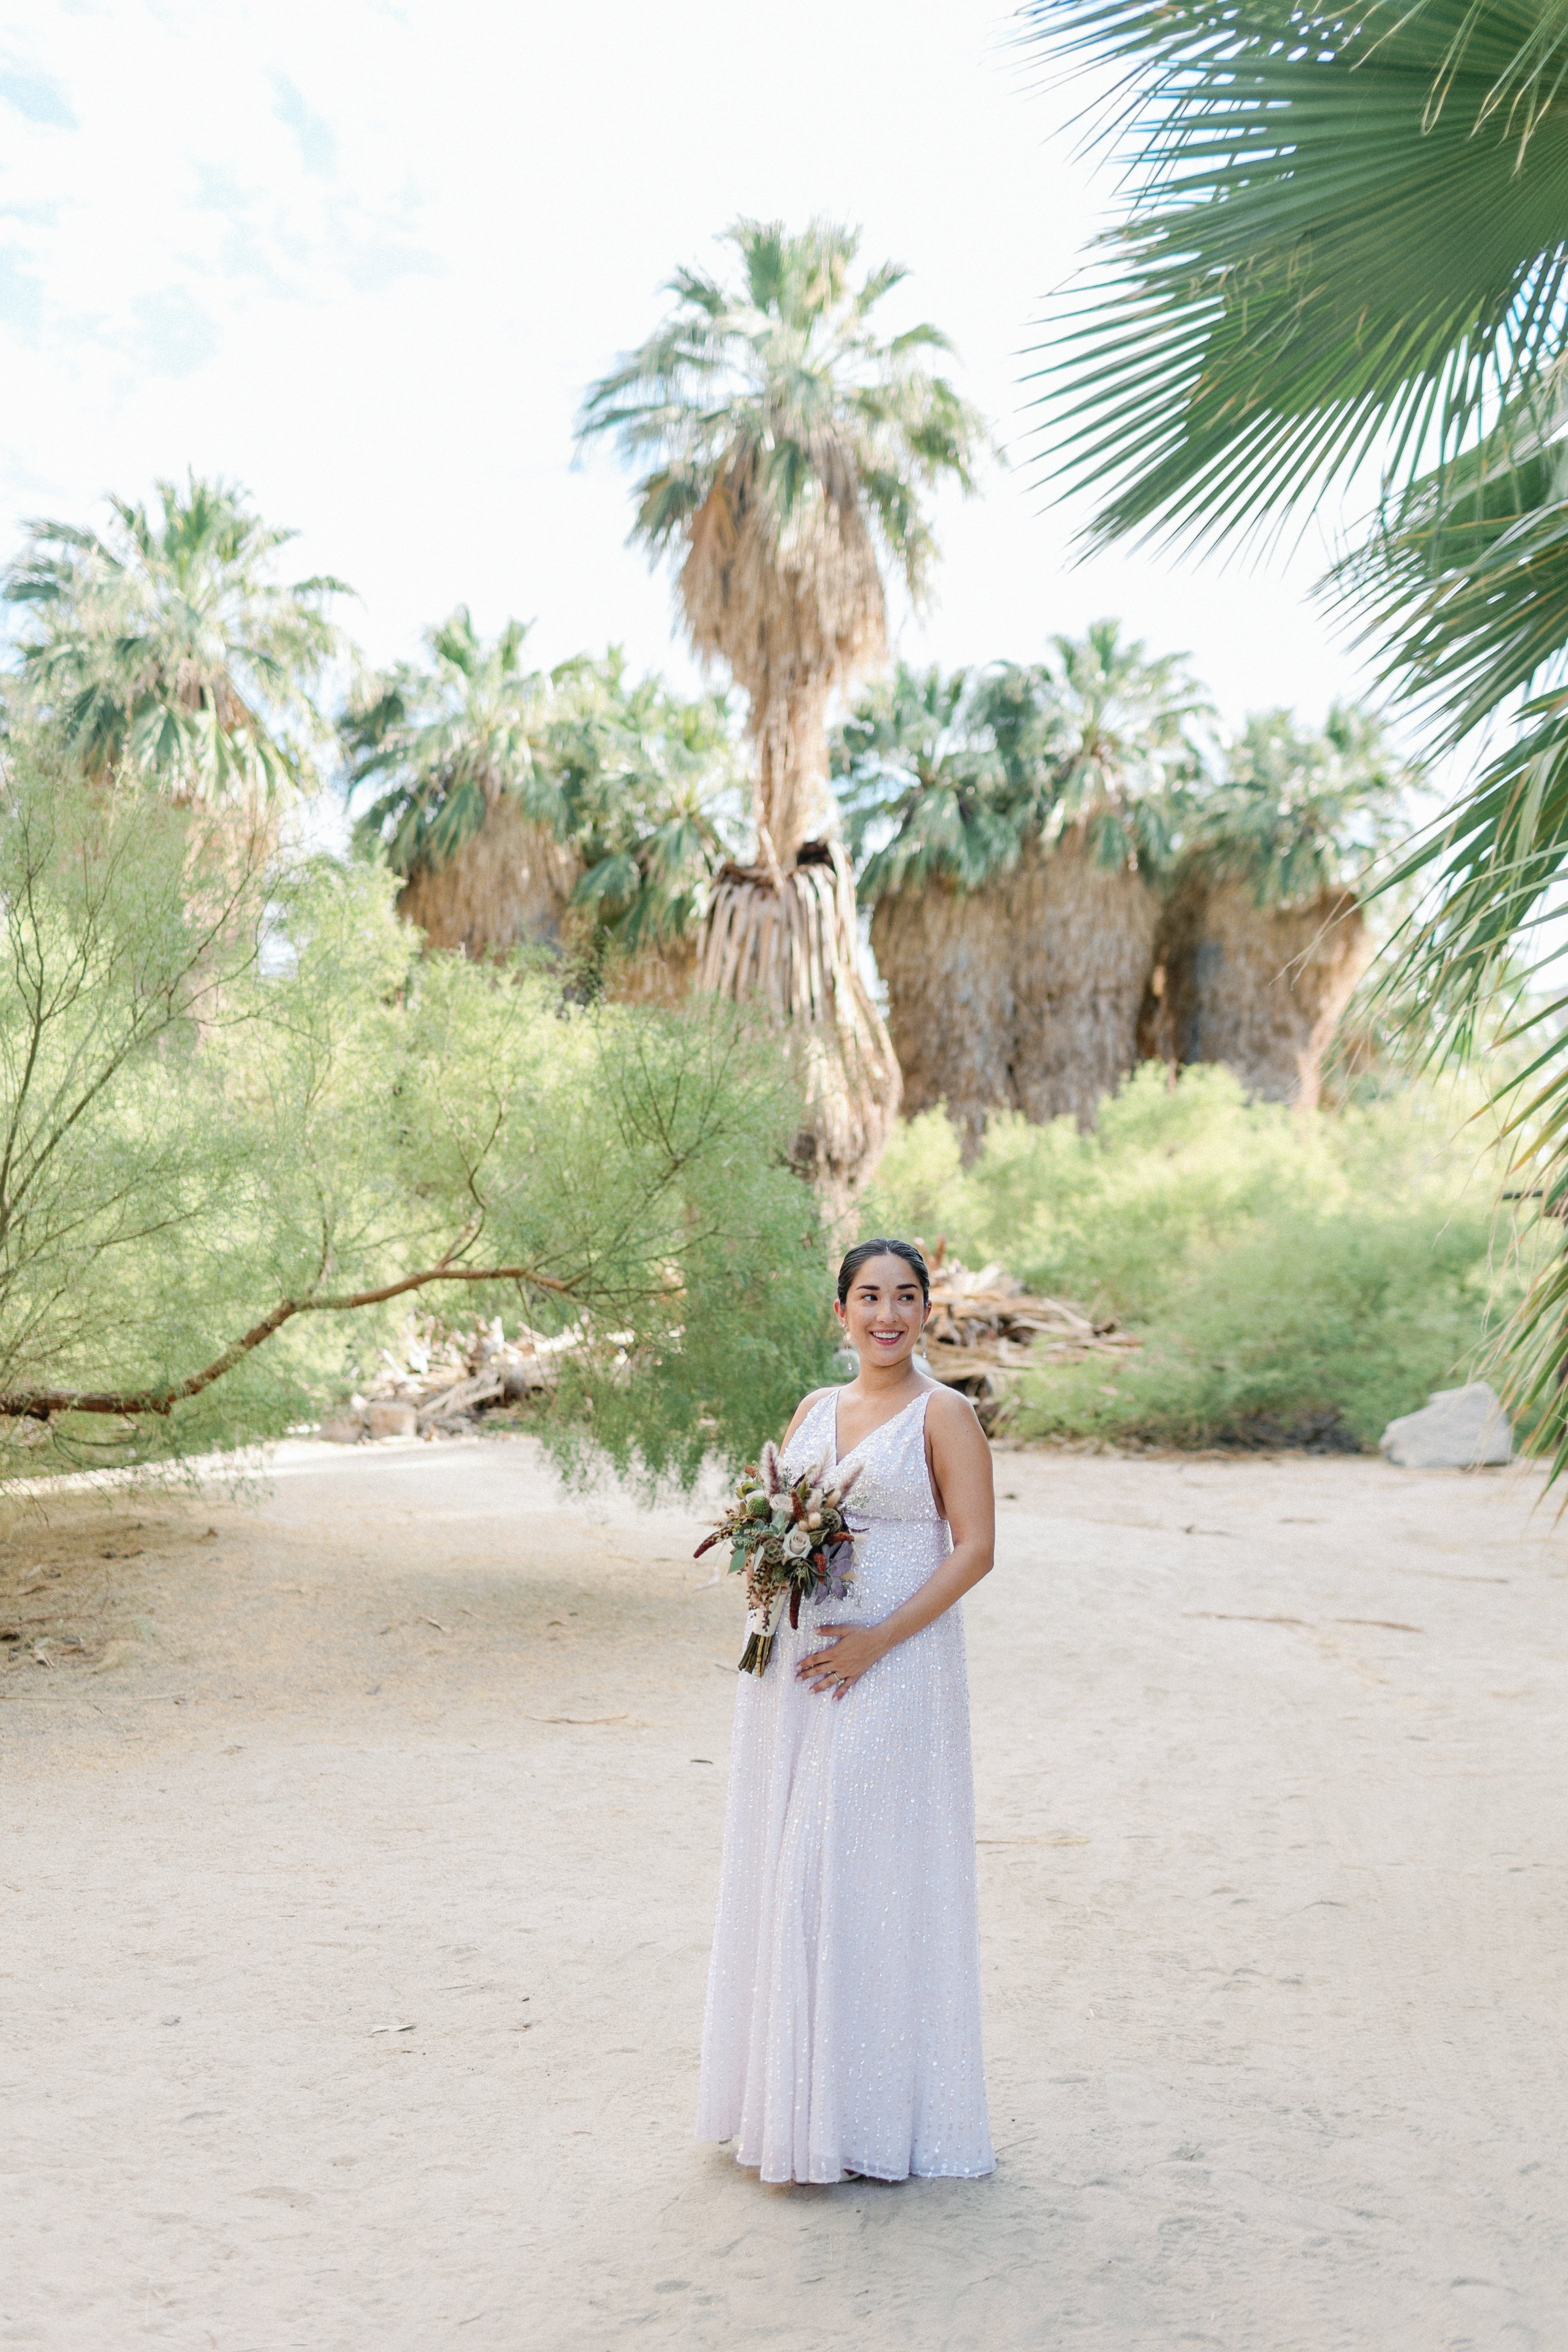 Natalie and Ricardo's Thousand Palm Oasis Elopement-1.jpg